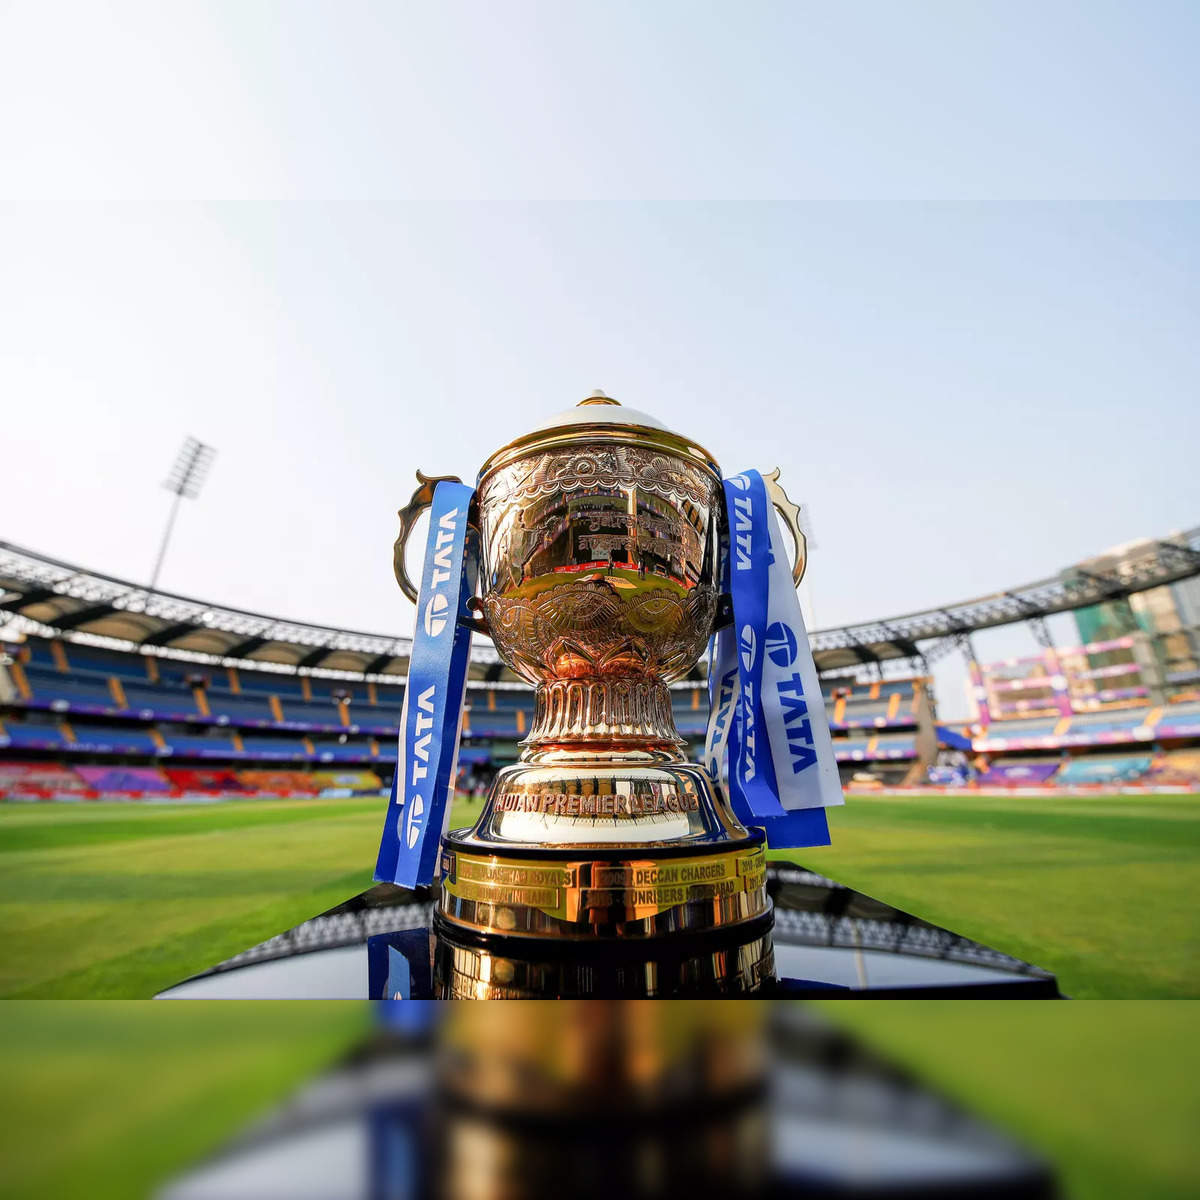 IPL FIXING SCAM going to be one of the Election issues opposition going to raise in 2024 General Elections !!!??
Who is getting Benifited !!??
Who are all involved !!!???
Remember Wrong things can't be cover up  for long time truth will come out ,
Teams letting down winning